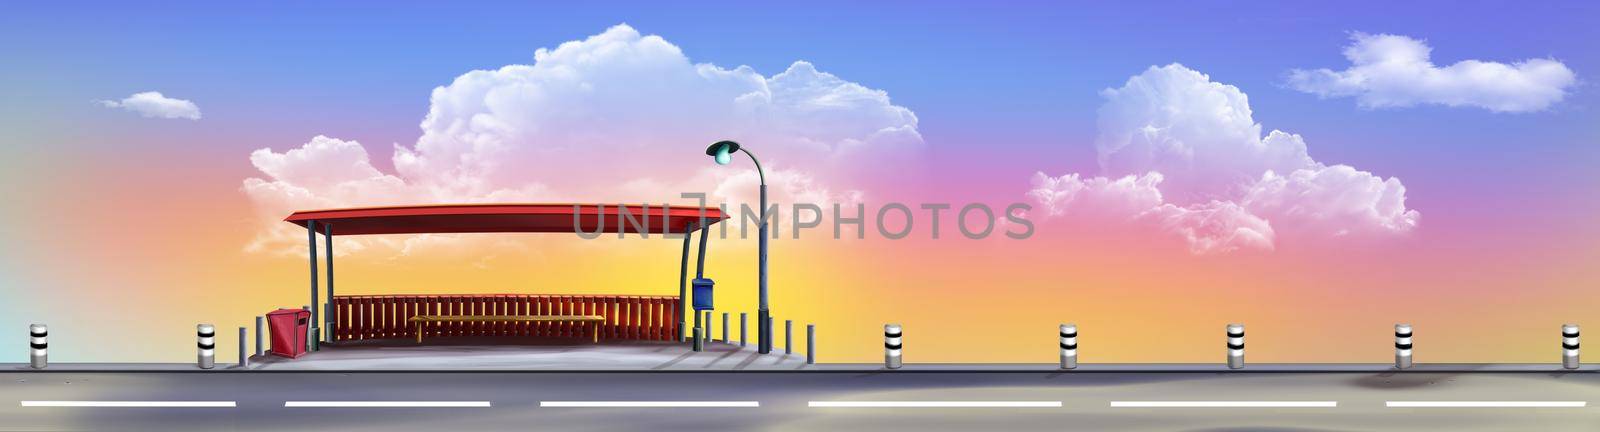 Bus stop on a road illustration by Multipedia